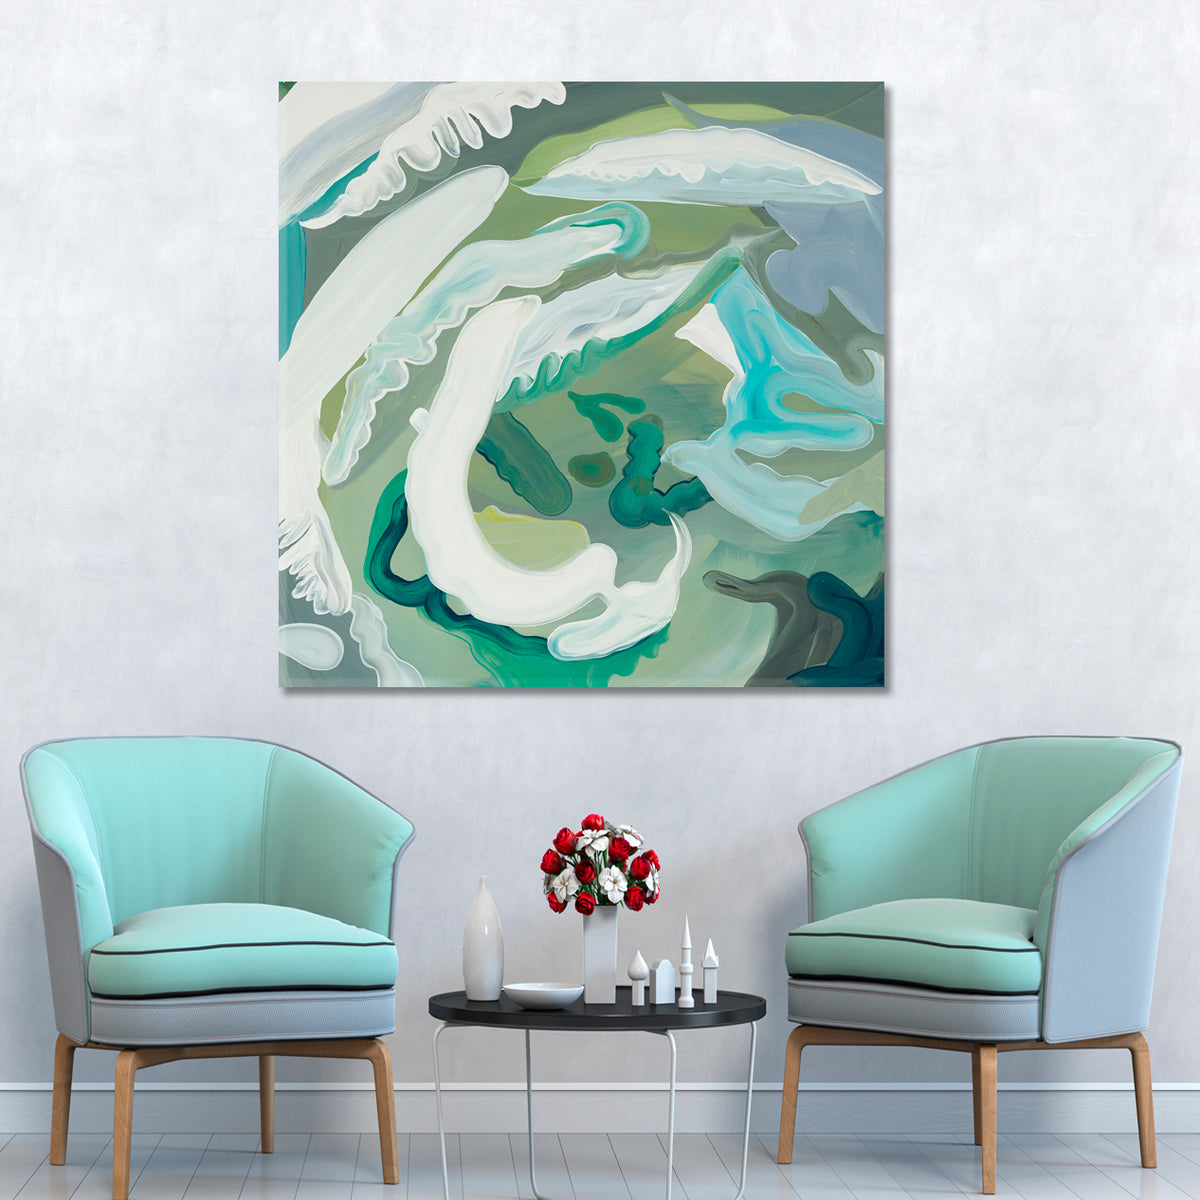 Modern Abstract Contemporary Teal Turquoise Mint Abstract Art Print Artesty 1 Panel 12"x12" 